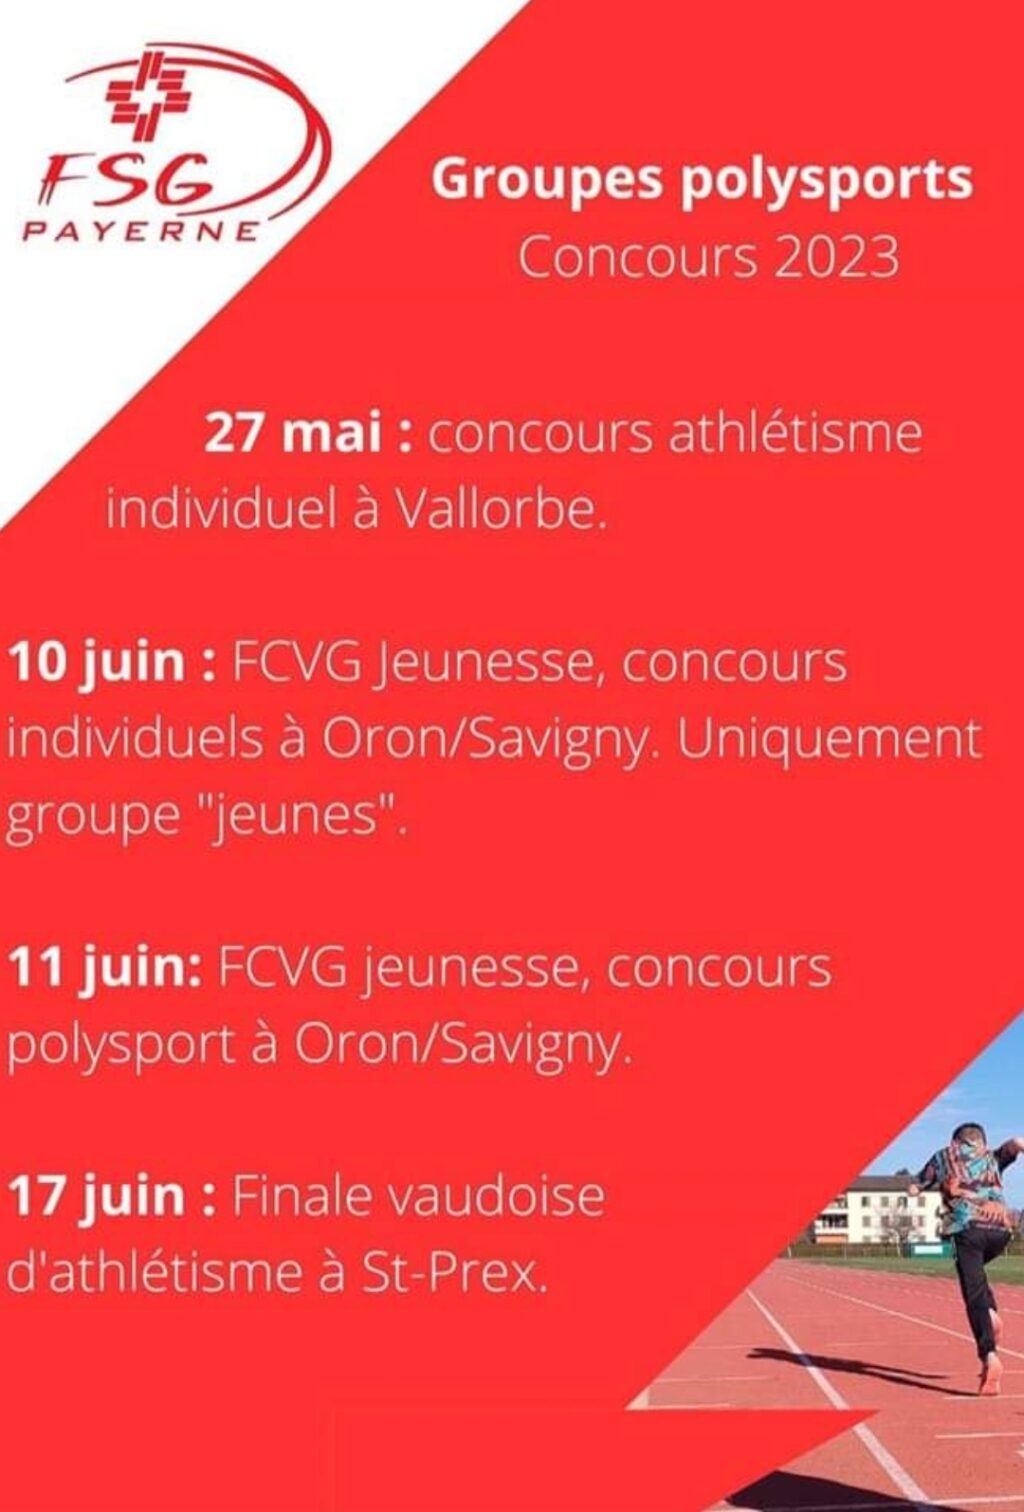 Concours 2023 - Groupes Polysports FSG Payerne